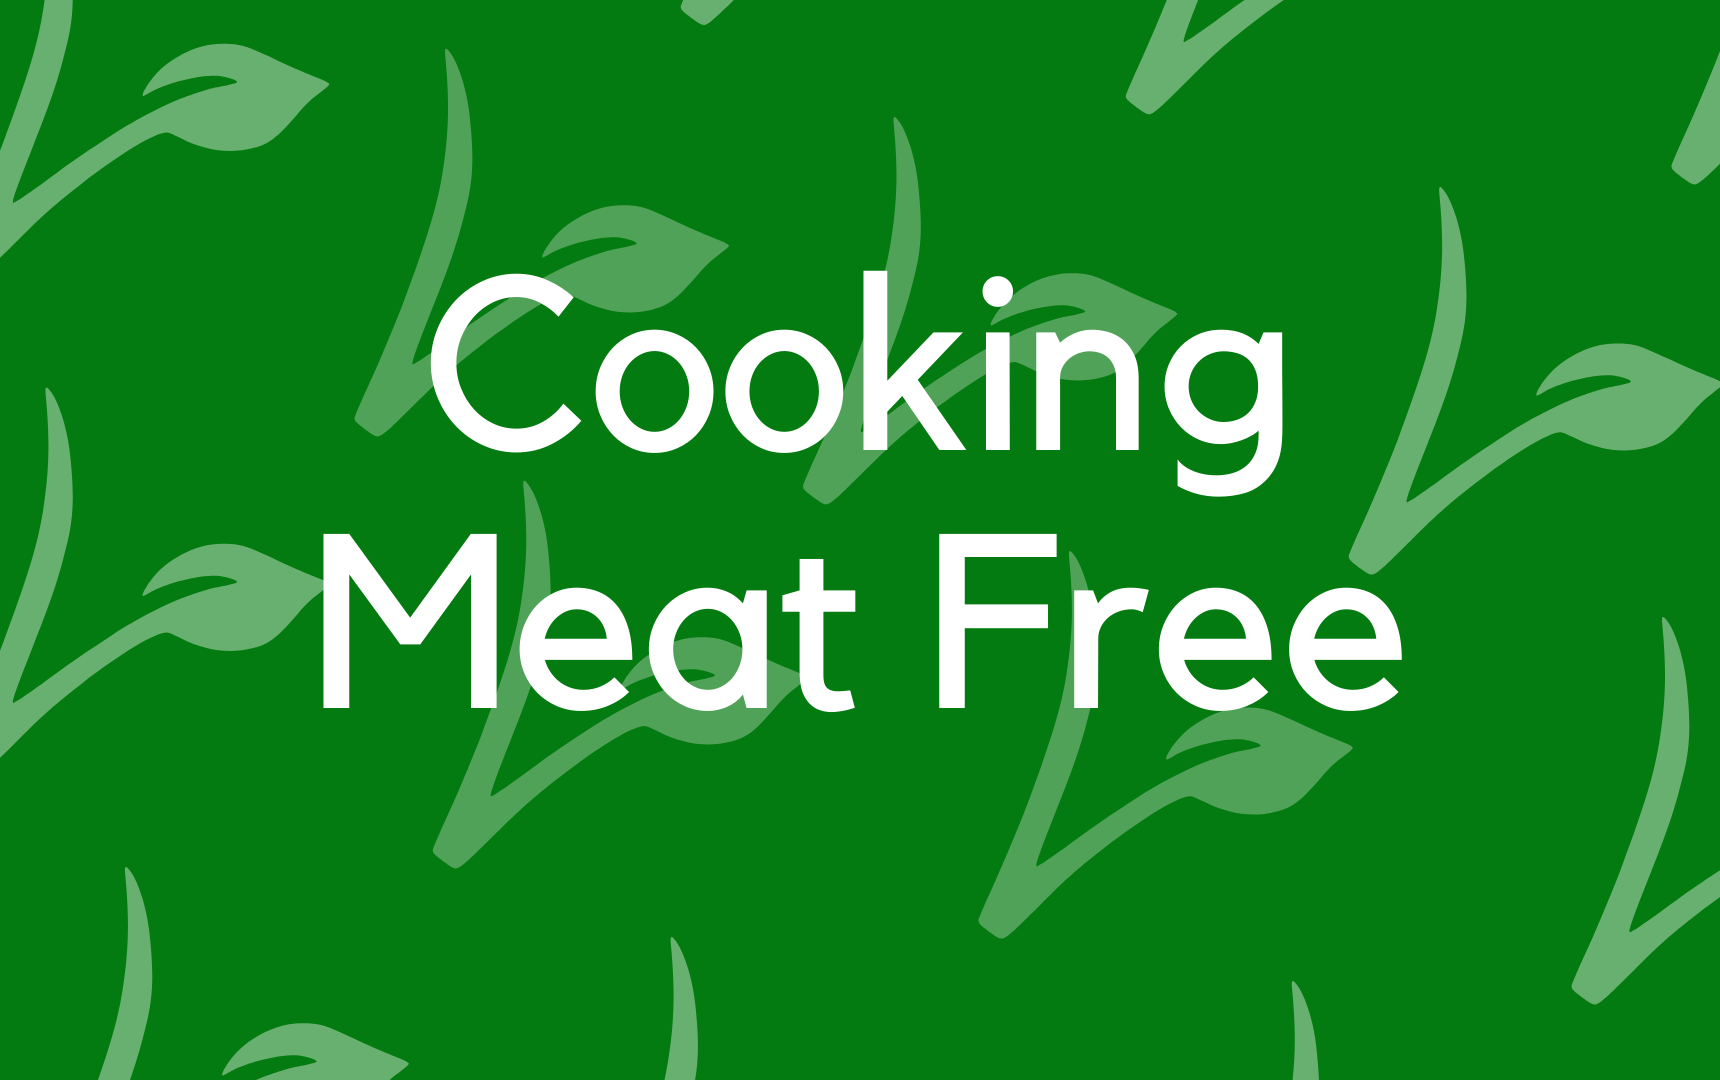 Cooking Meat Free